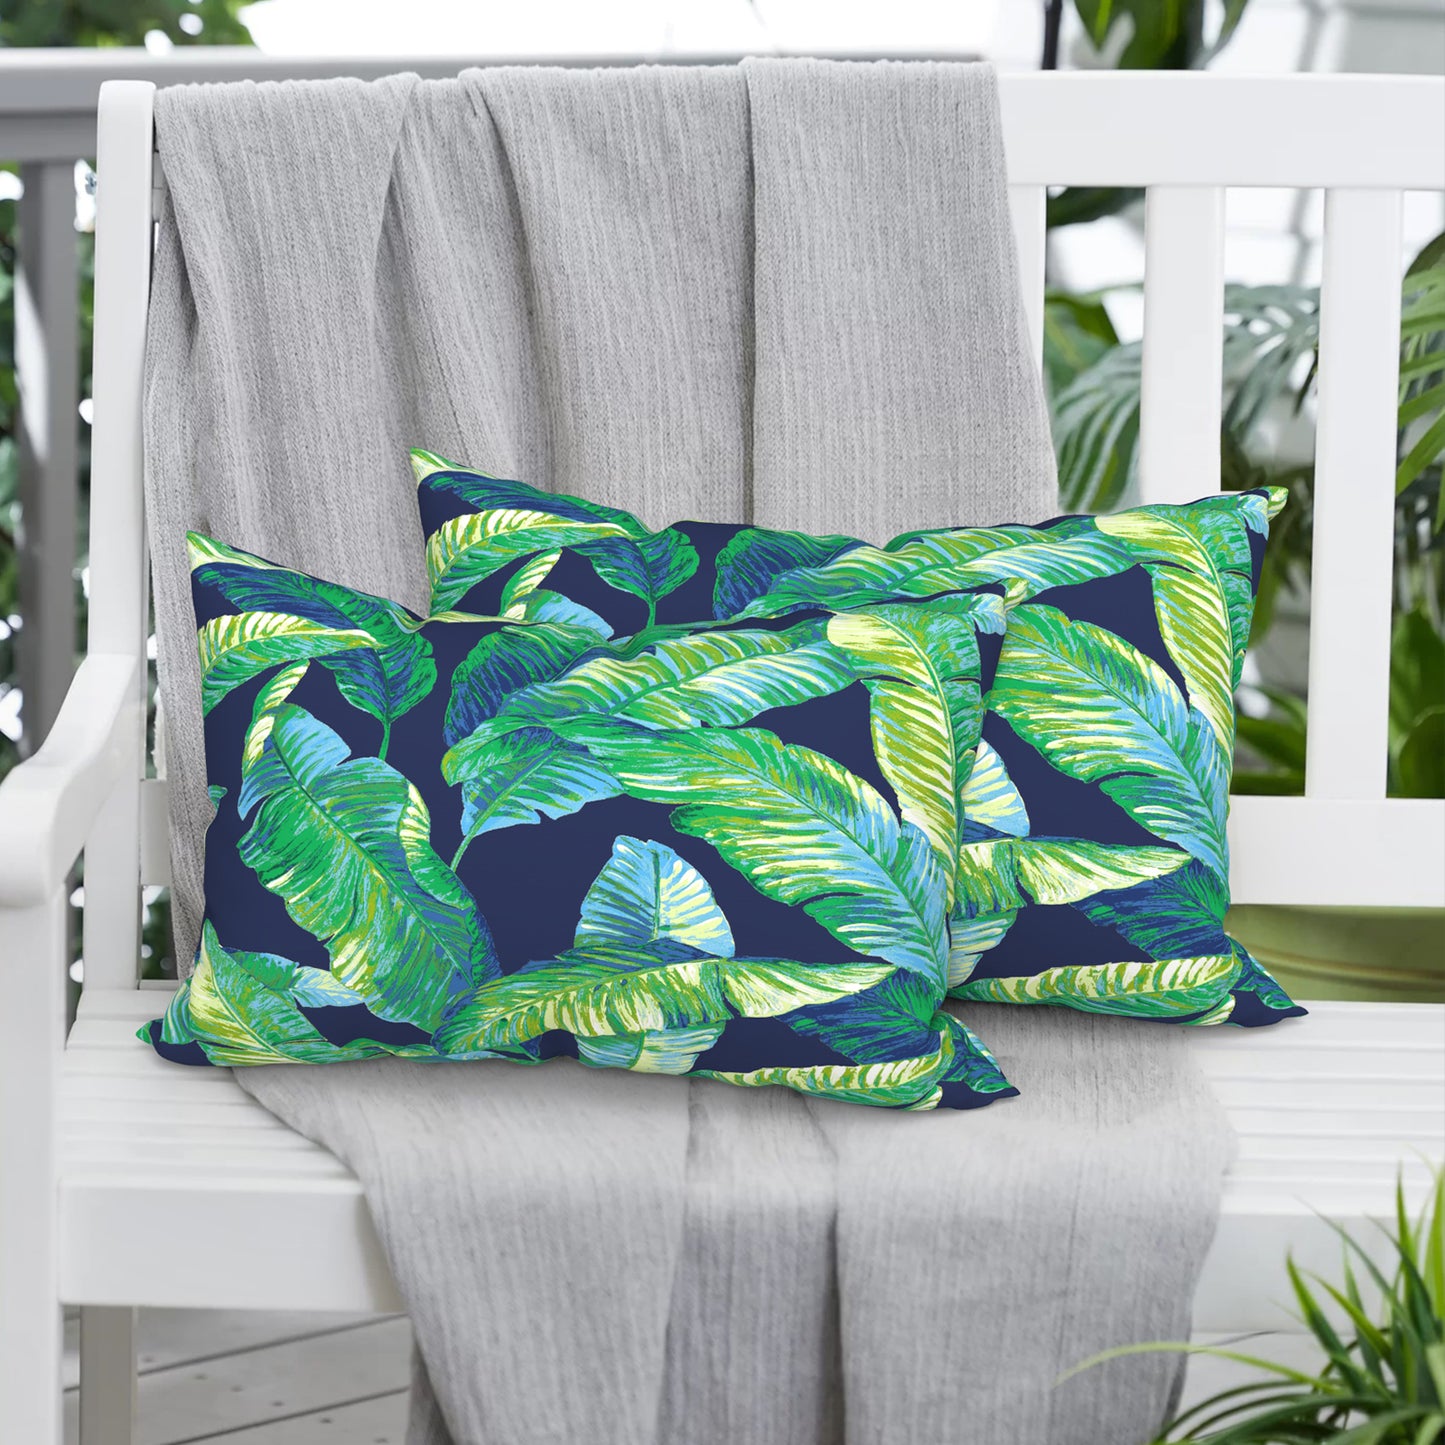 Melody Elephant Pack of 2 Outdoor Lumbar Pillow Covers, All Weather Cushion Pillow Cases 12x20 Inch, Pillowcase for Patio Couch Decoration, Hanalei Lagoon